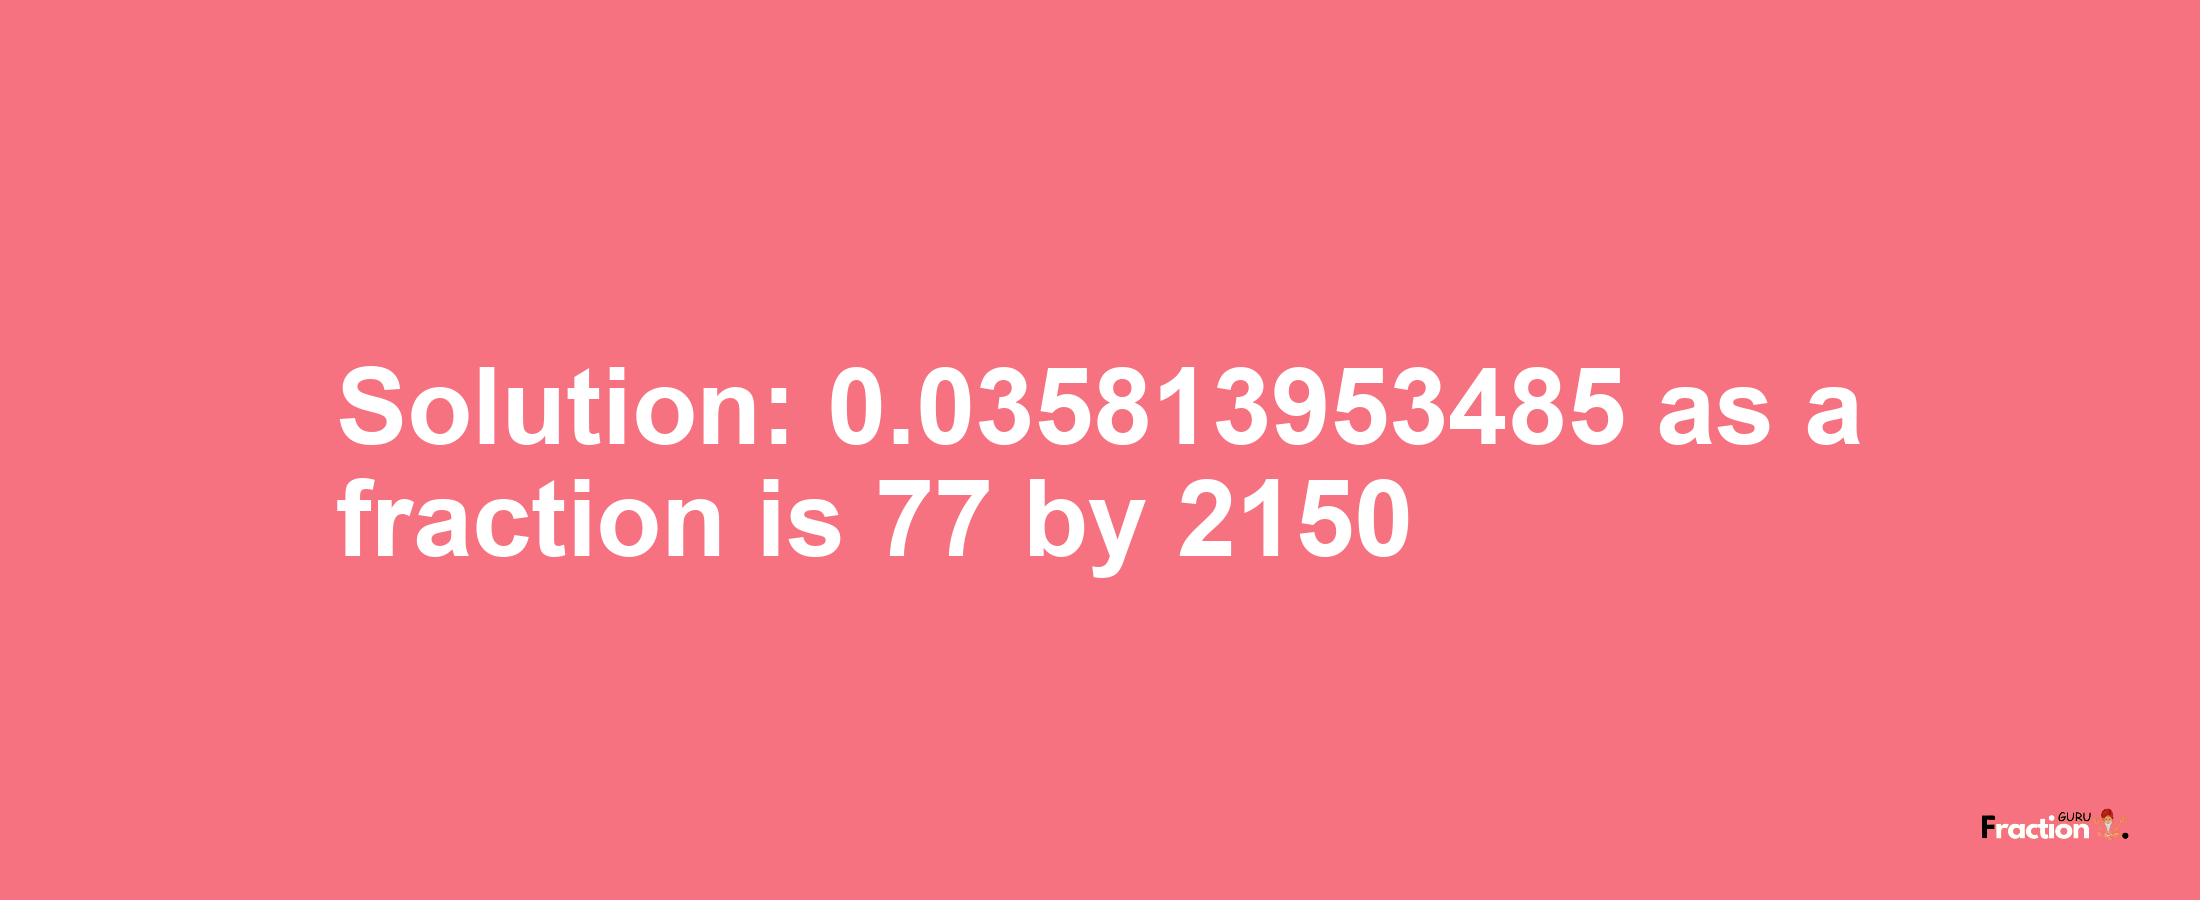 Solution:0.035813953485 as a fraction is 77/2150